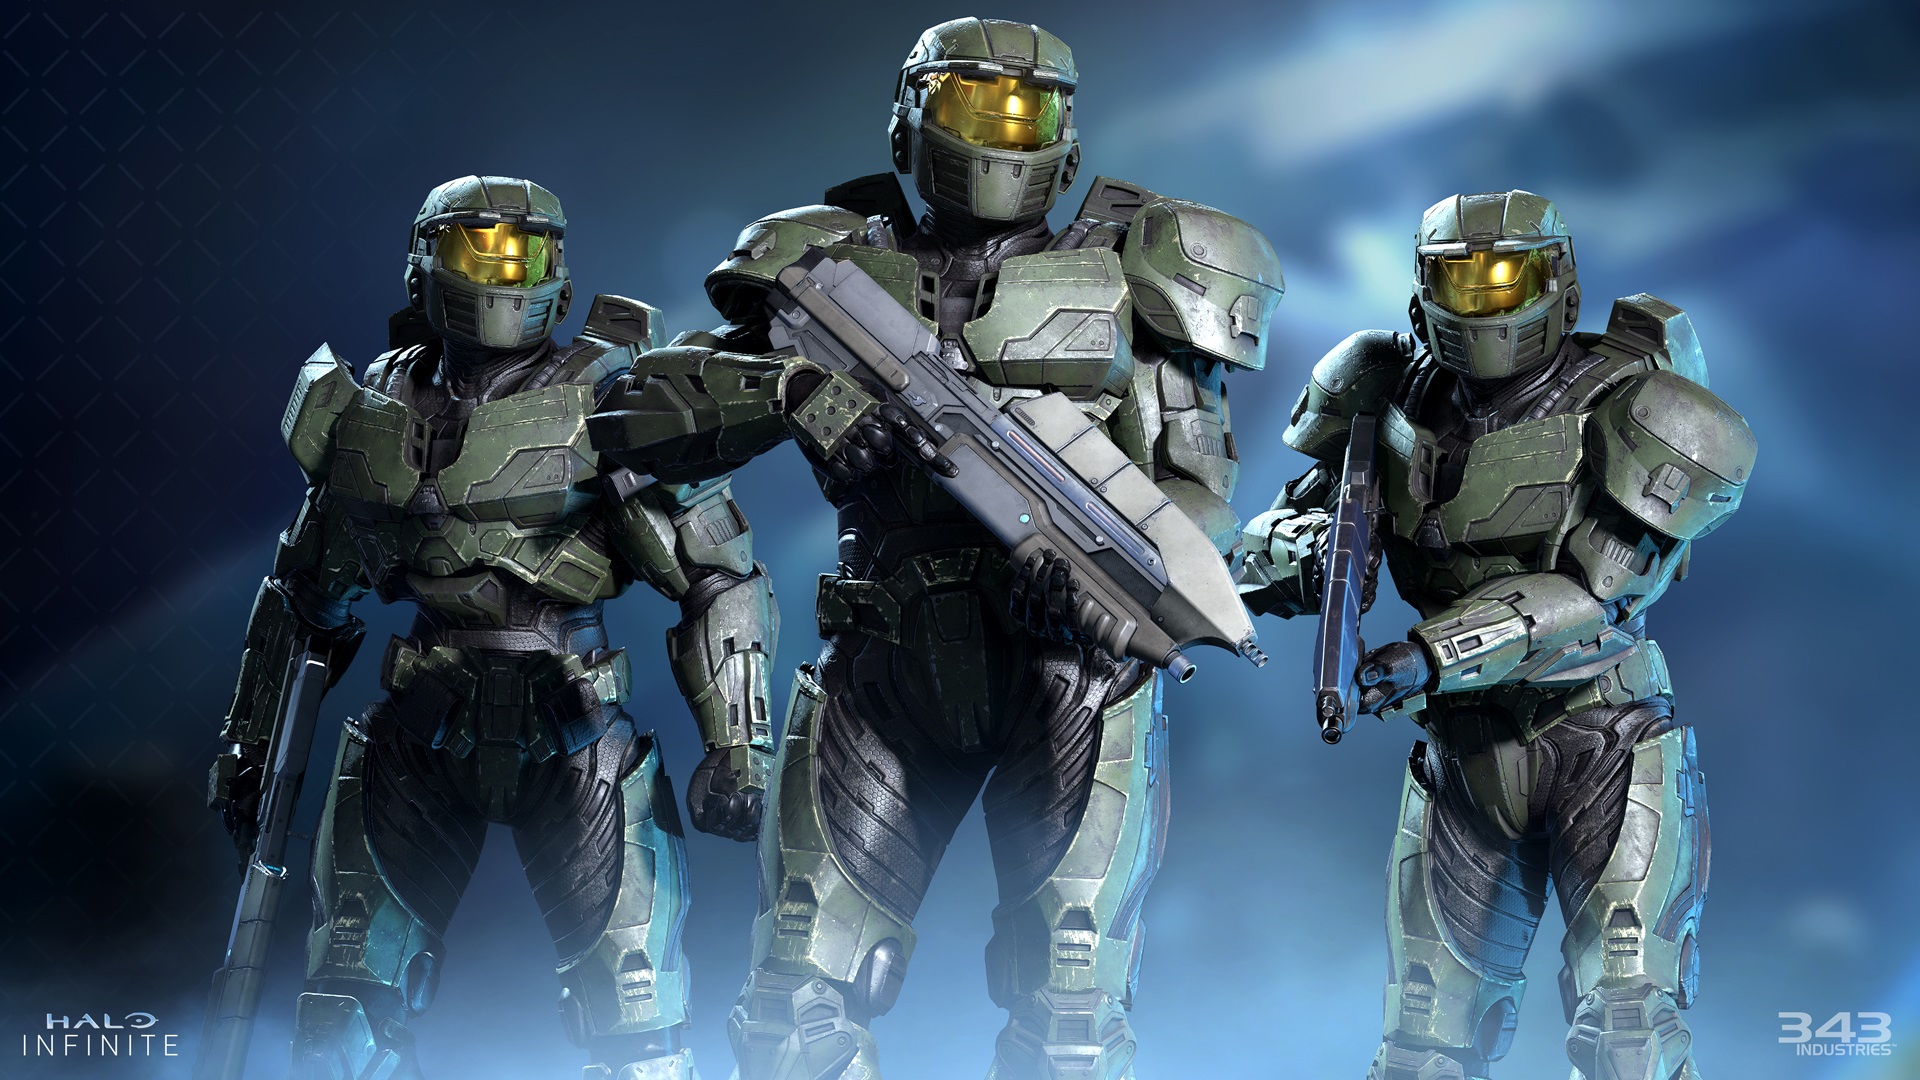 Halo Infinite image of three Spartans clad in Mark IV armor with the Evolved MA5 Assault Rifle weapon model